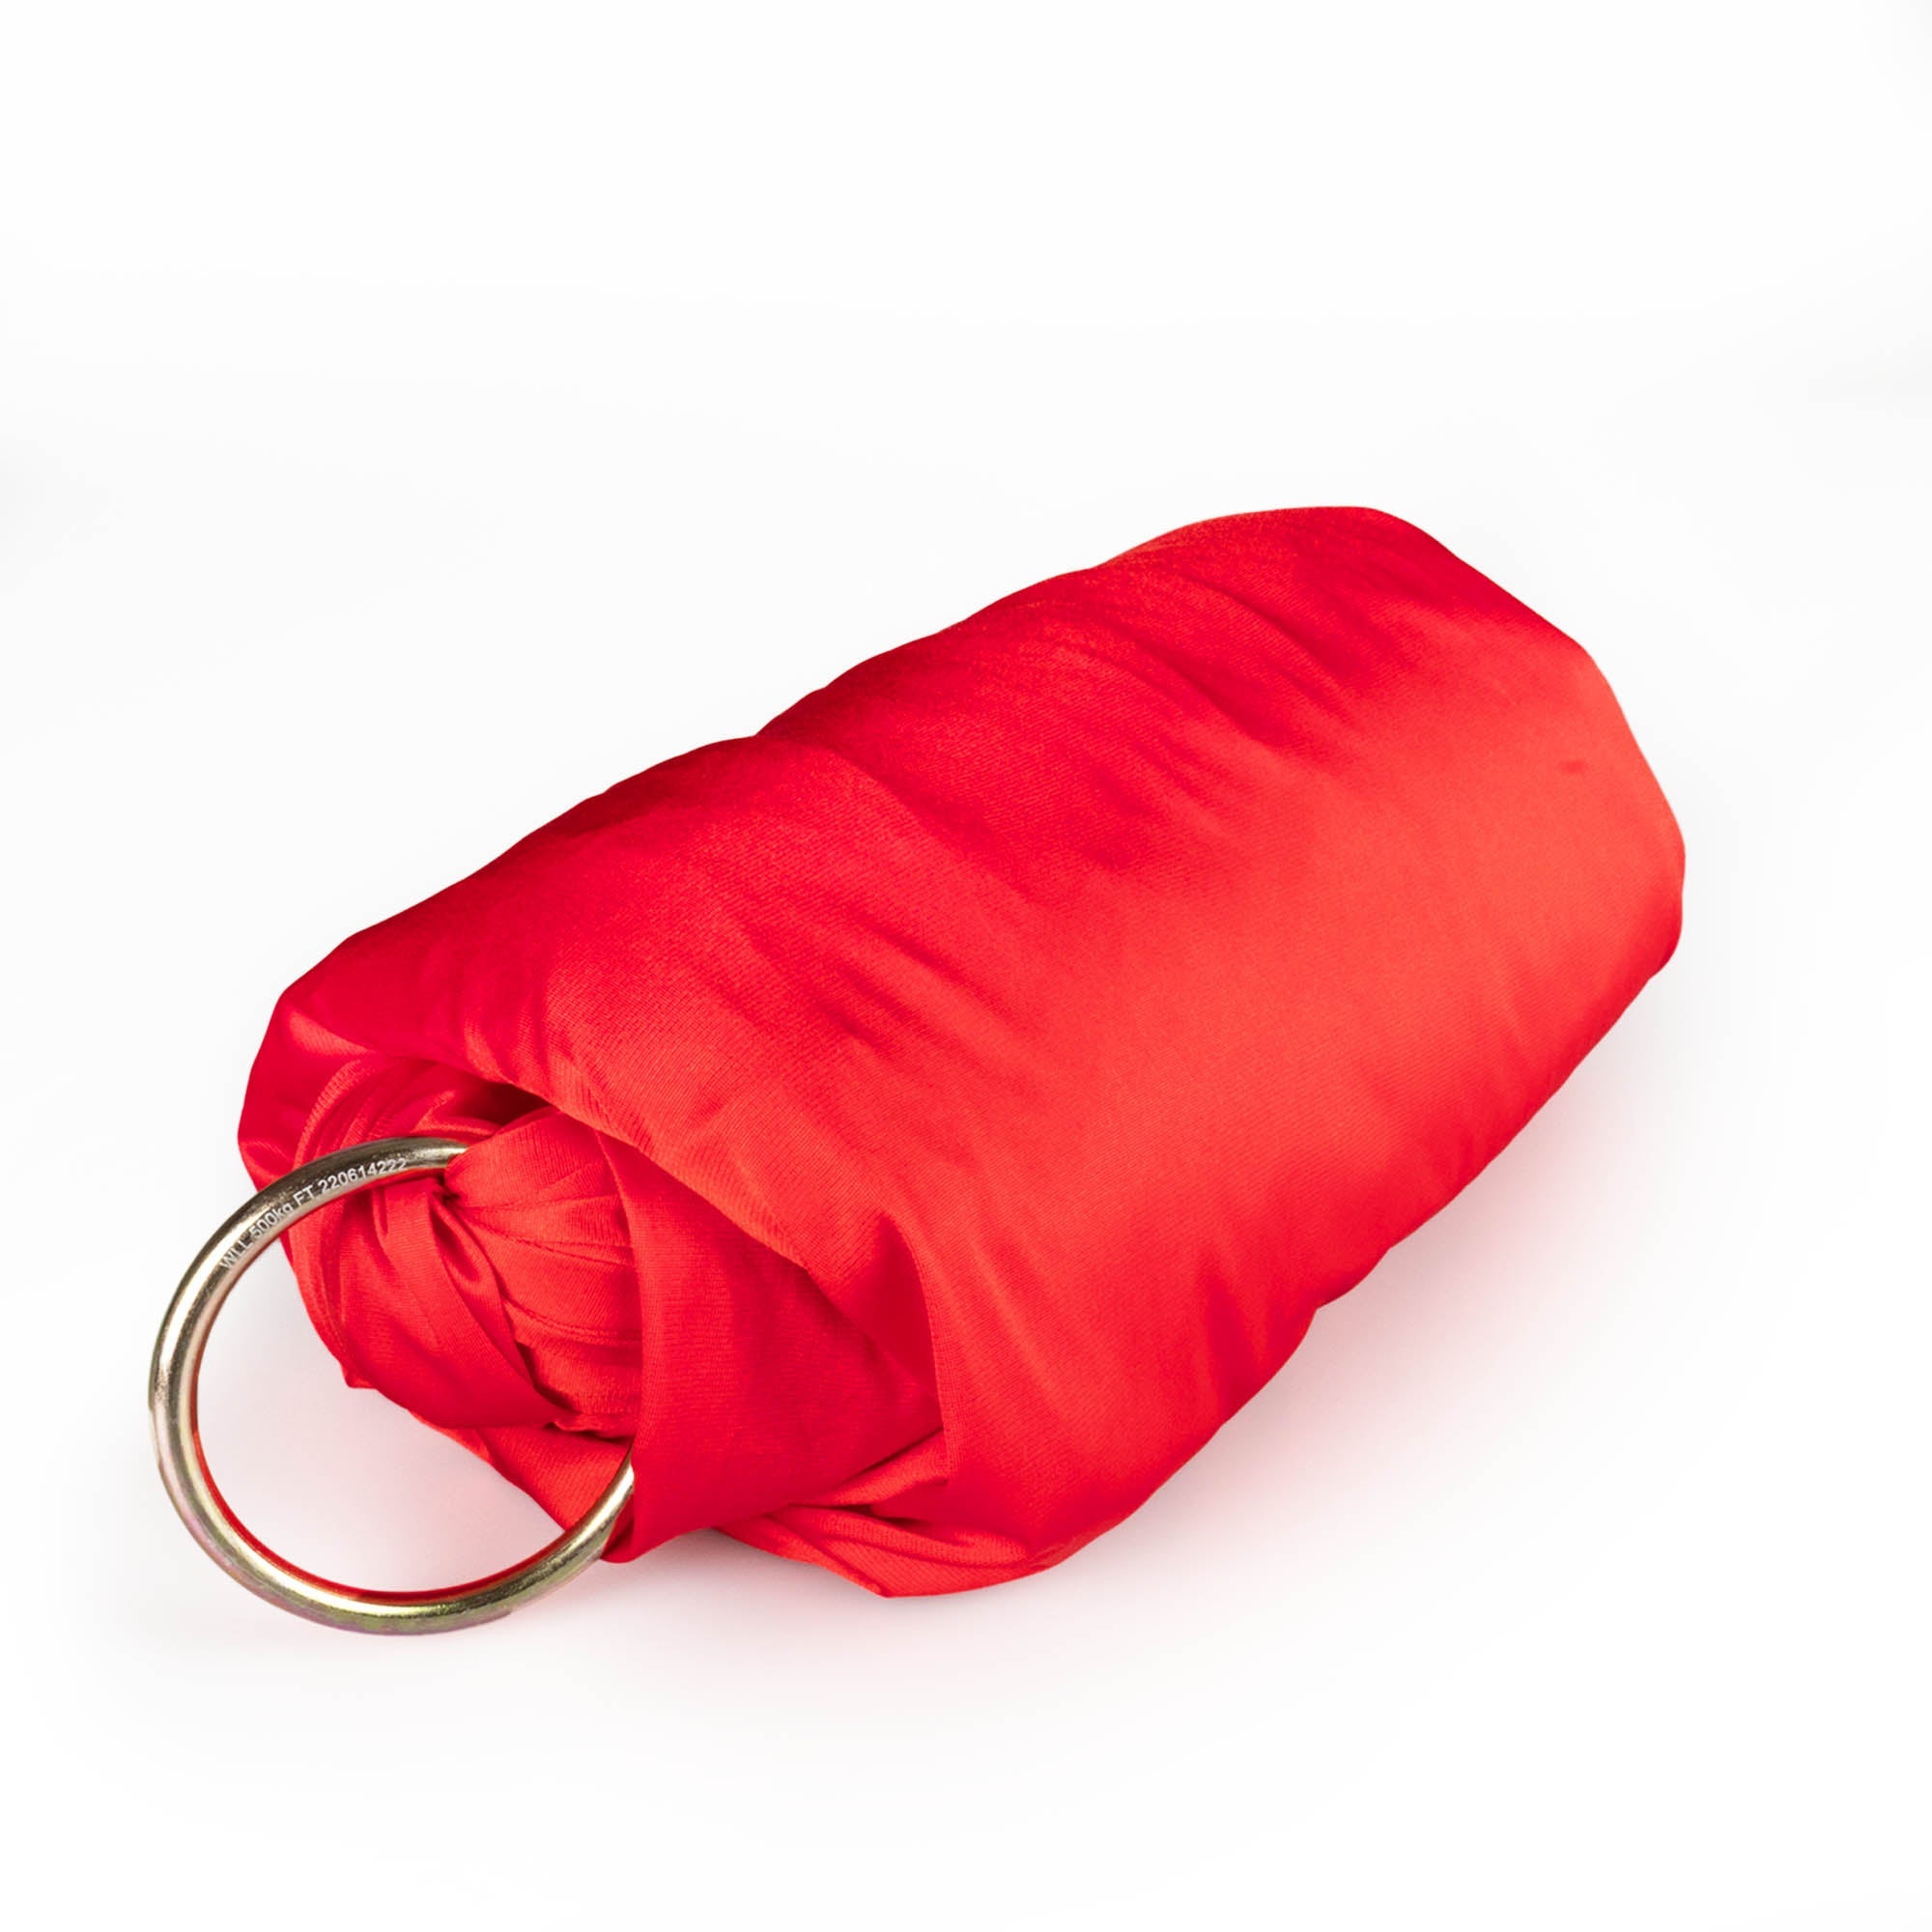 Red yoga hammock rolled up with rings attached